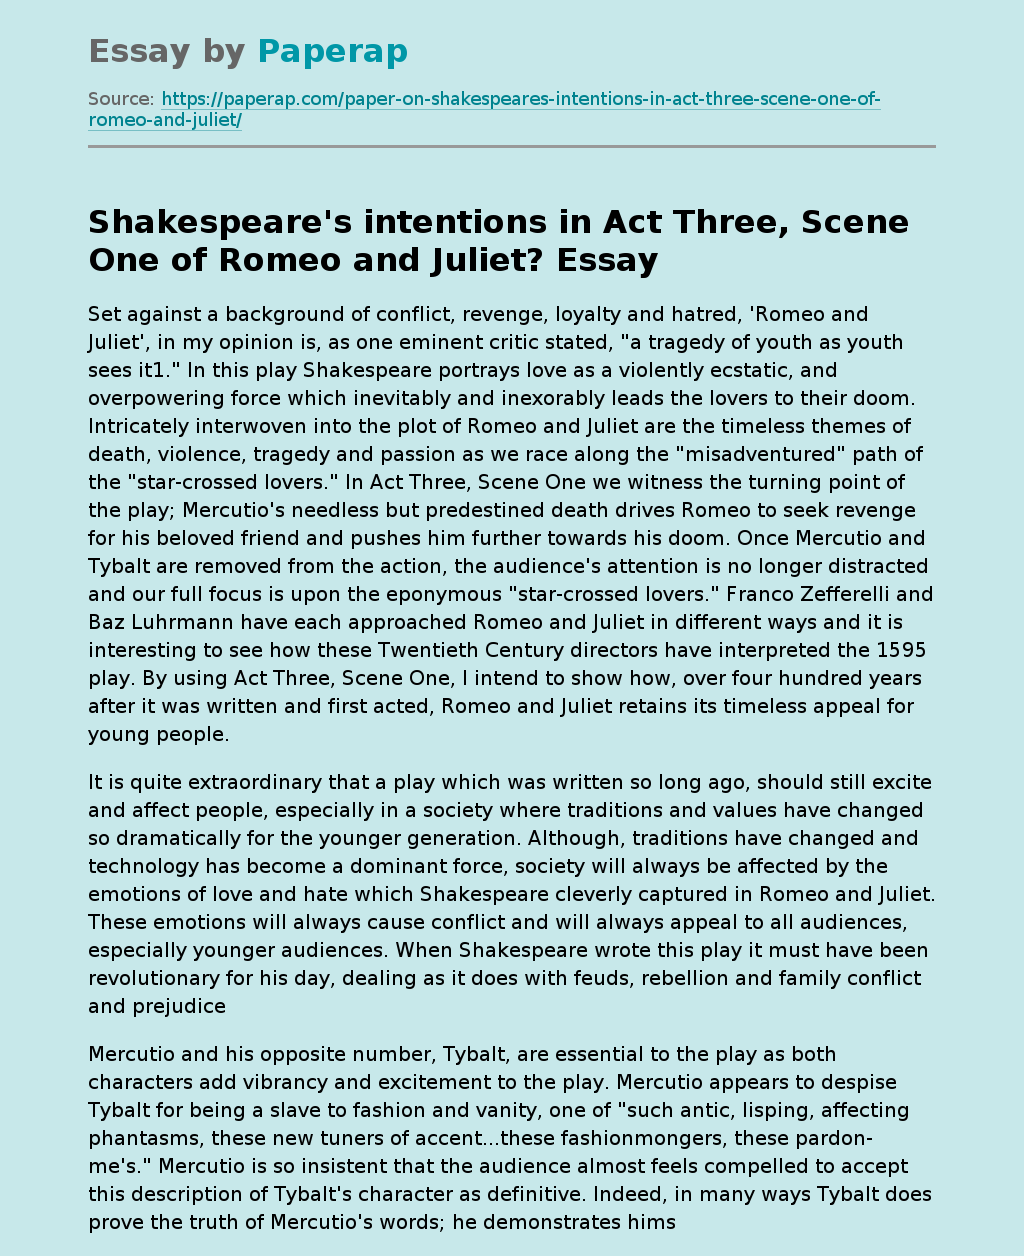 Shakespeare's intentions in Act Three, Scene One of Romeo and Juliet?